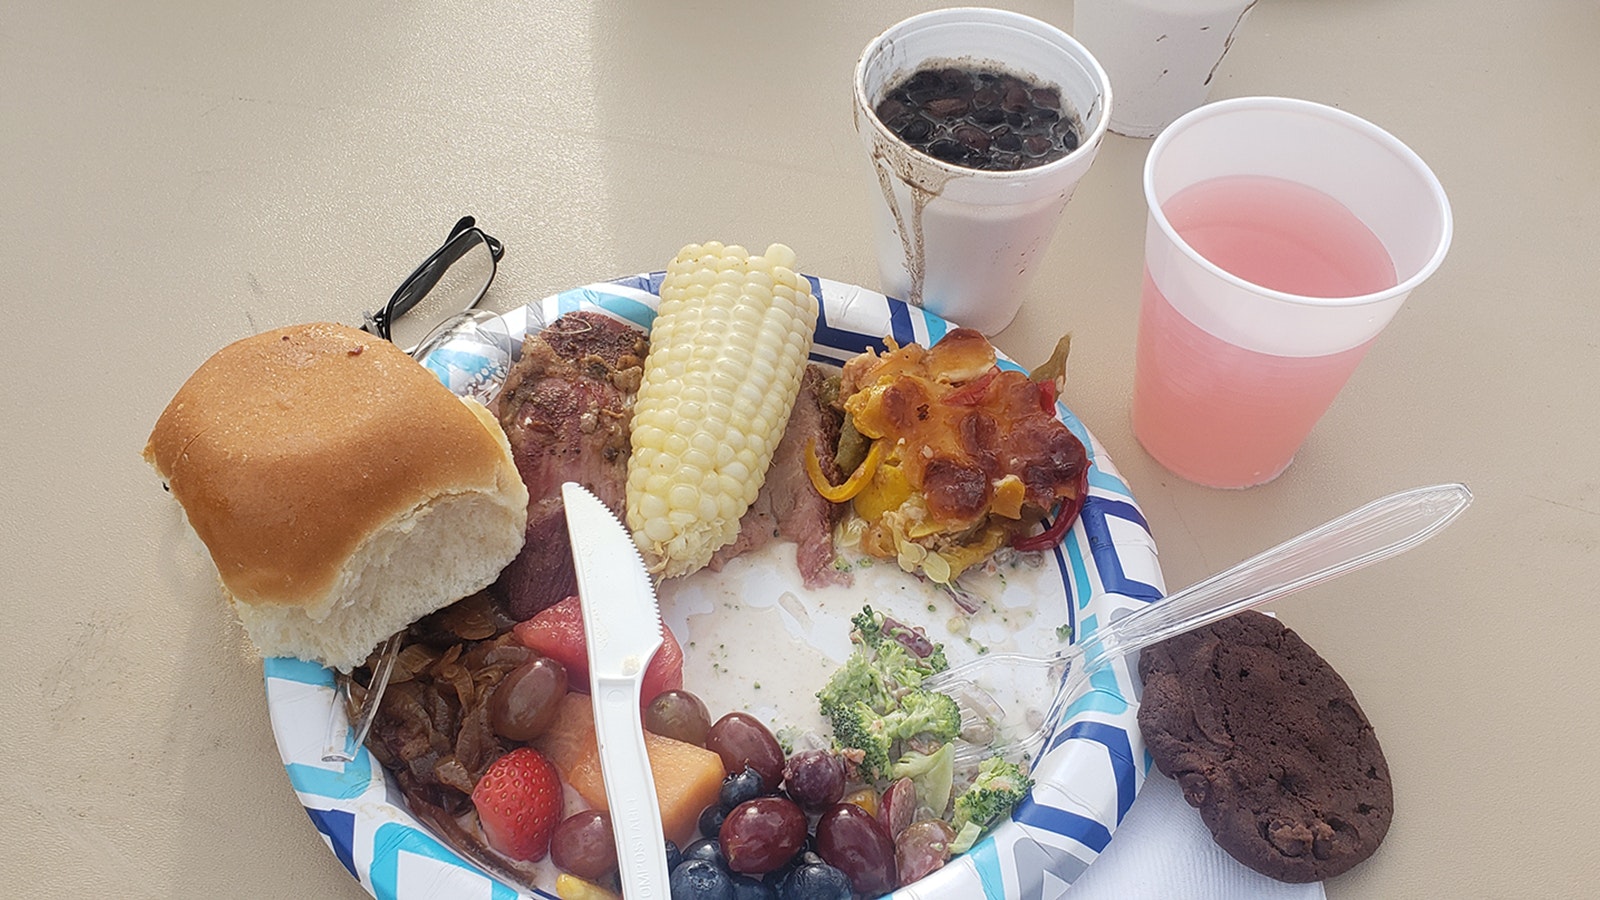 A plate with pulled pork, lamb and beef, as well as broccoli salad and squash casserole, some fruit, fresh corn and a dinner roll. The small coffee cup has beans from the famous community pot.